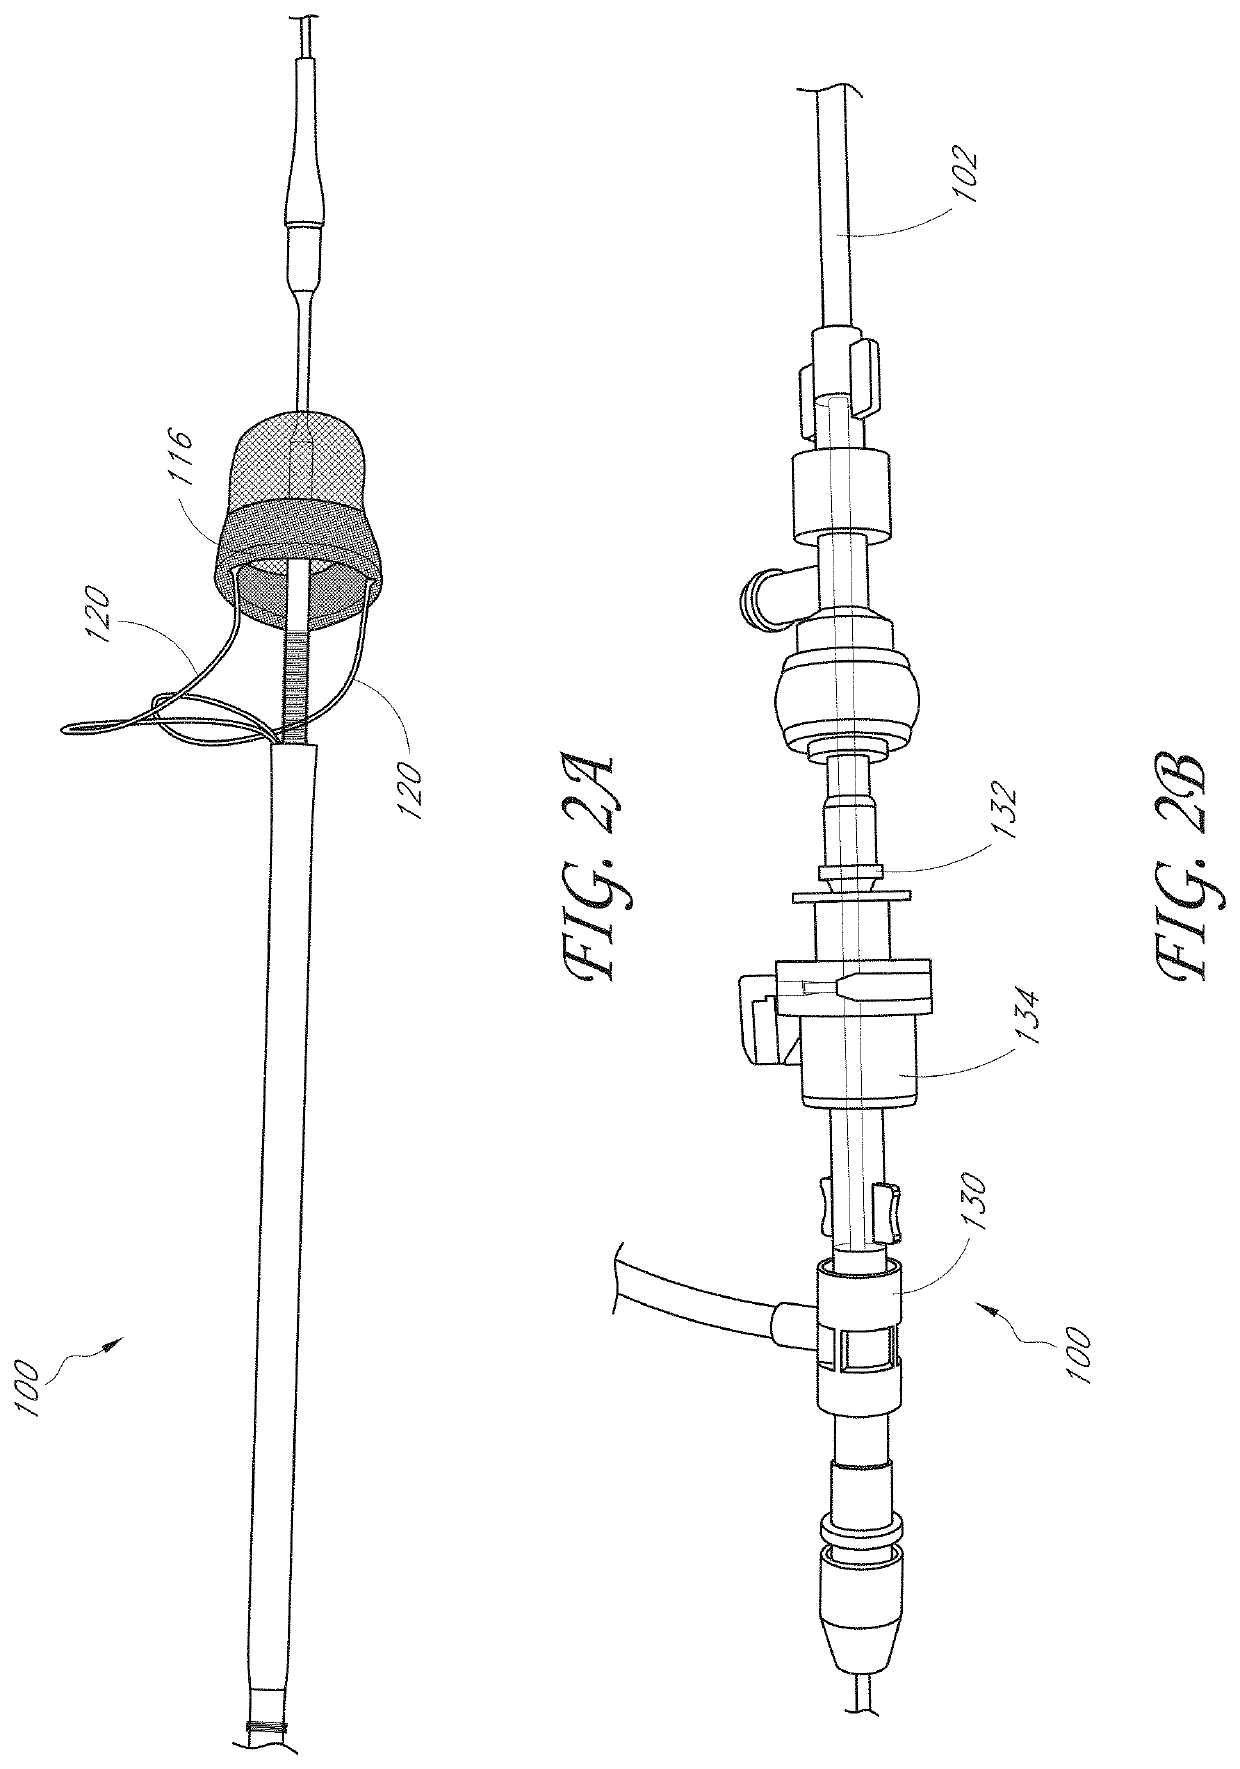 Axial lengthening thrombus capture system, tensioning system and expandable funnel catheter